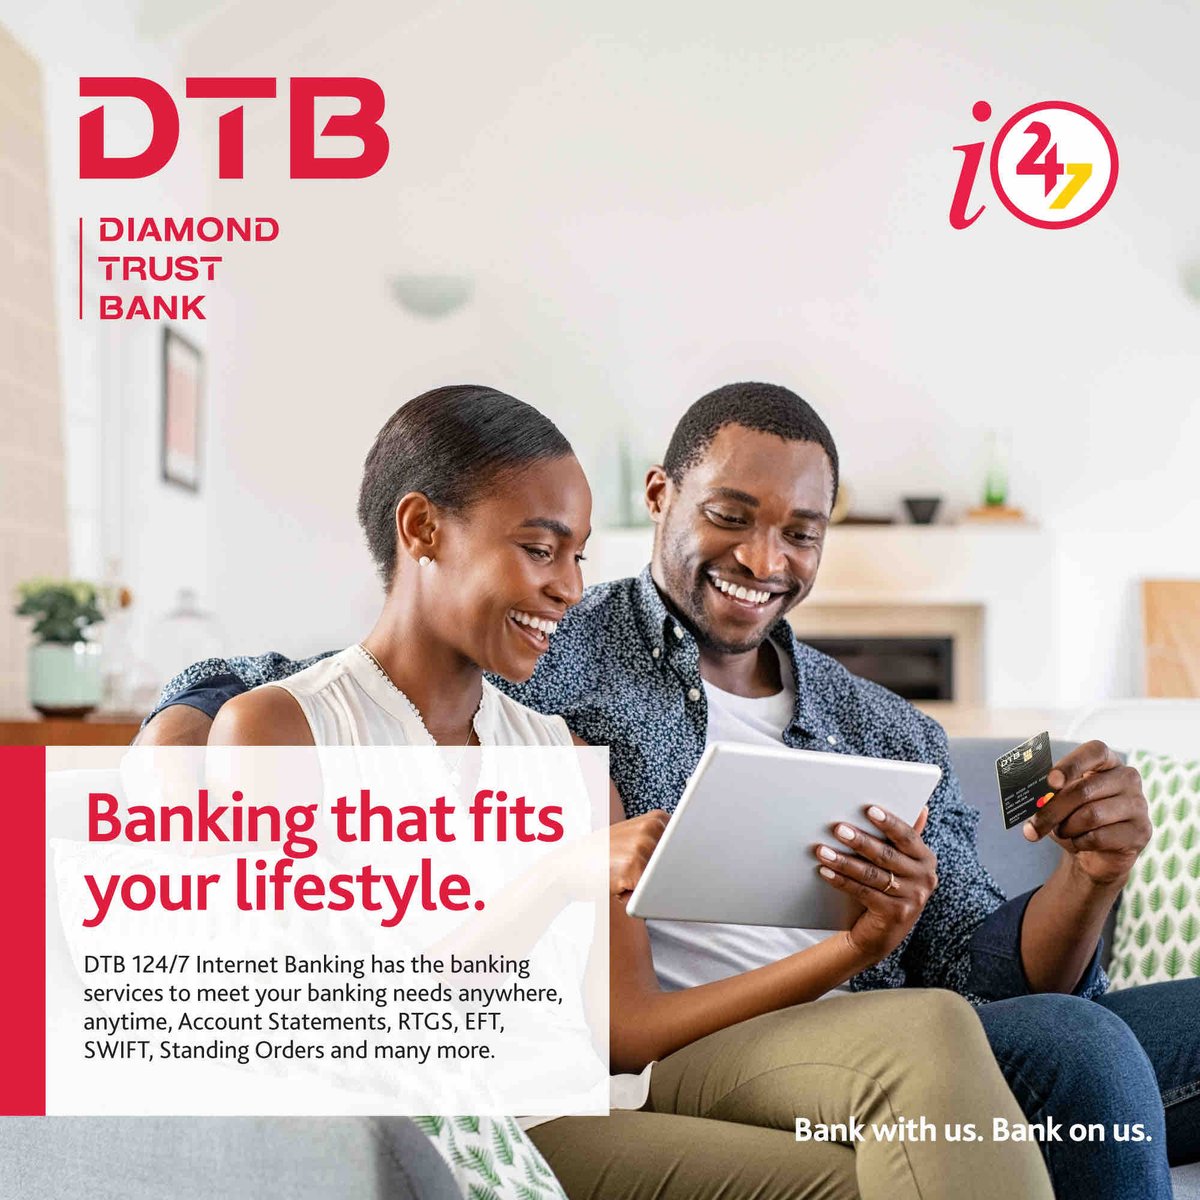 Enjoy today with family and friends as you bank conveniently with the DTB i24/7 internet banking. Call toll free 0800 242 242 or WhatsApp 0786 242 242 or email info@dtbuganda.co.ug for support. #BankWithUsBankOnUs